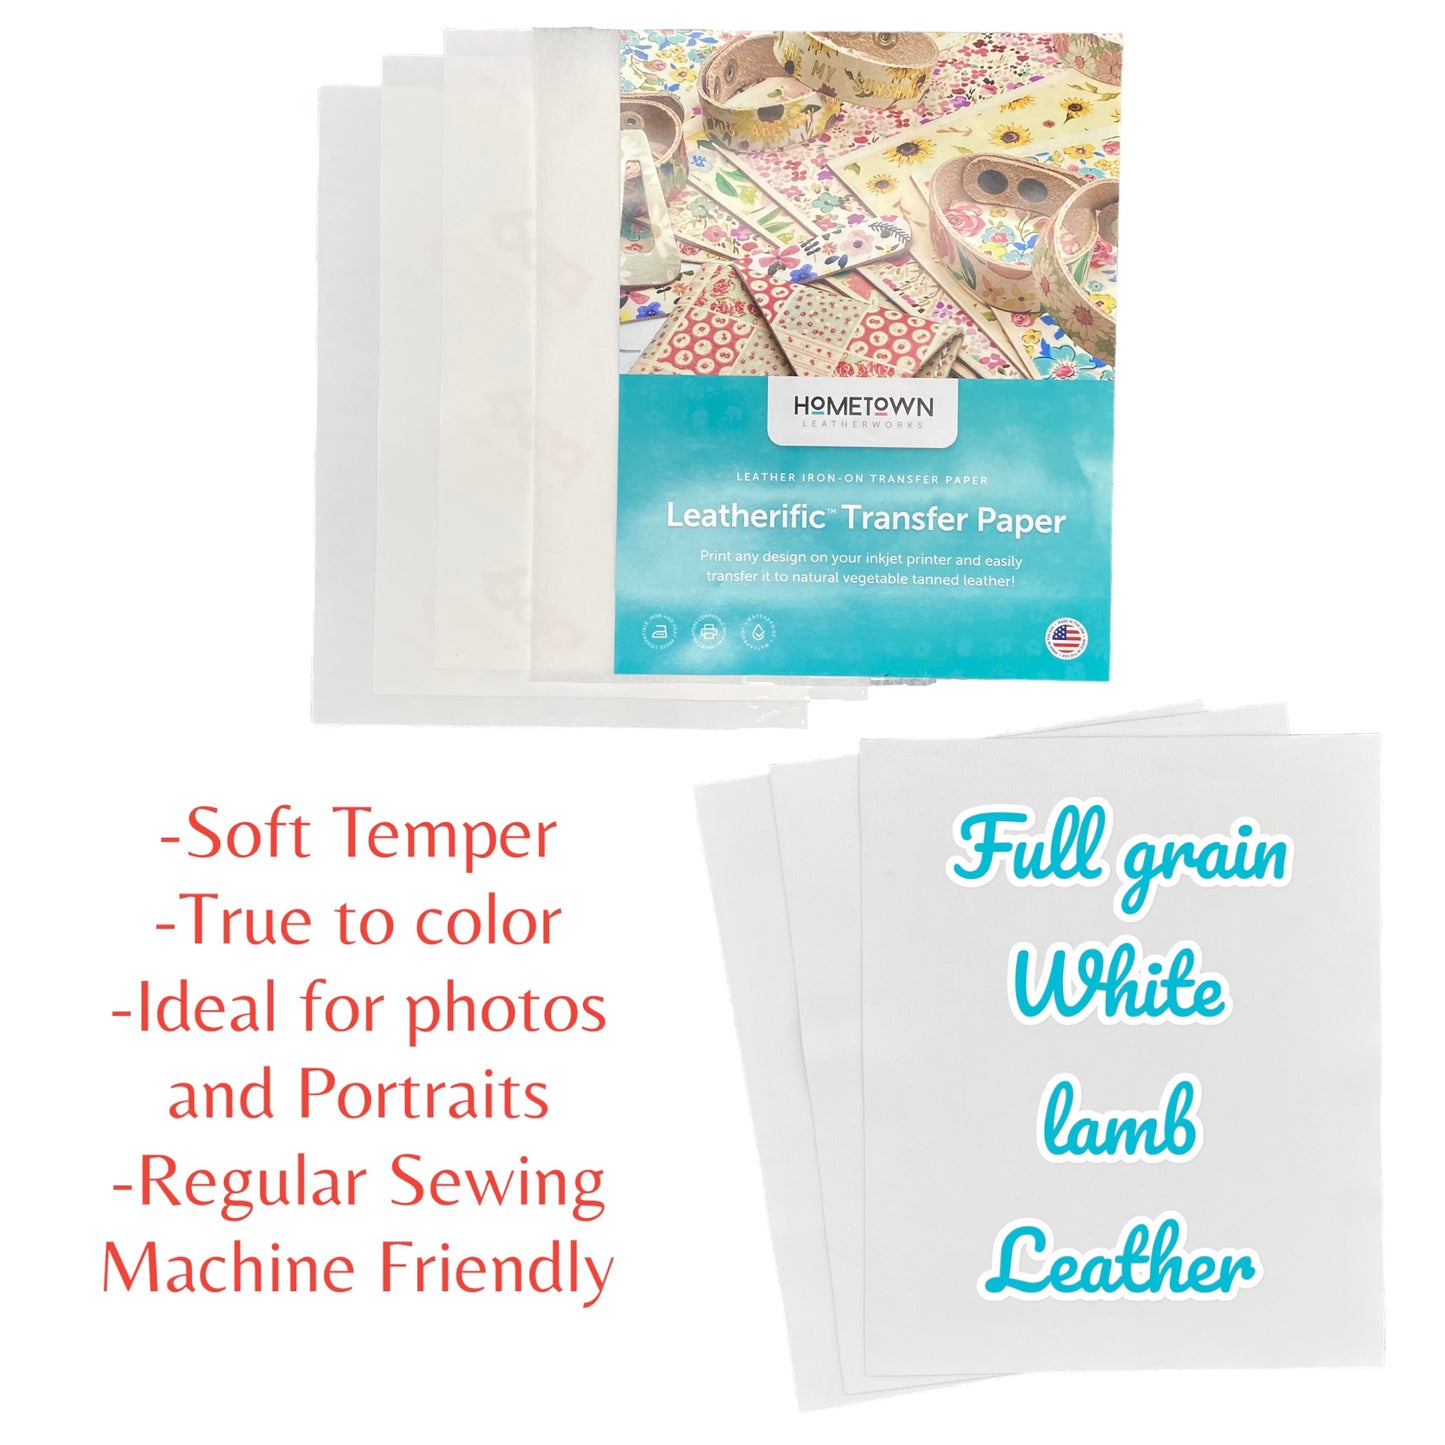 Leatherific Transfer Paper and White Lamb Leather Bundle 8 1/2" By 11"